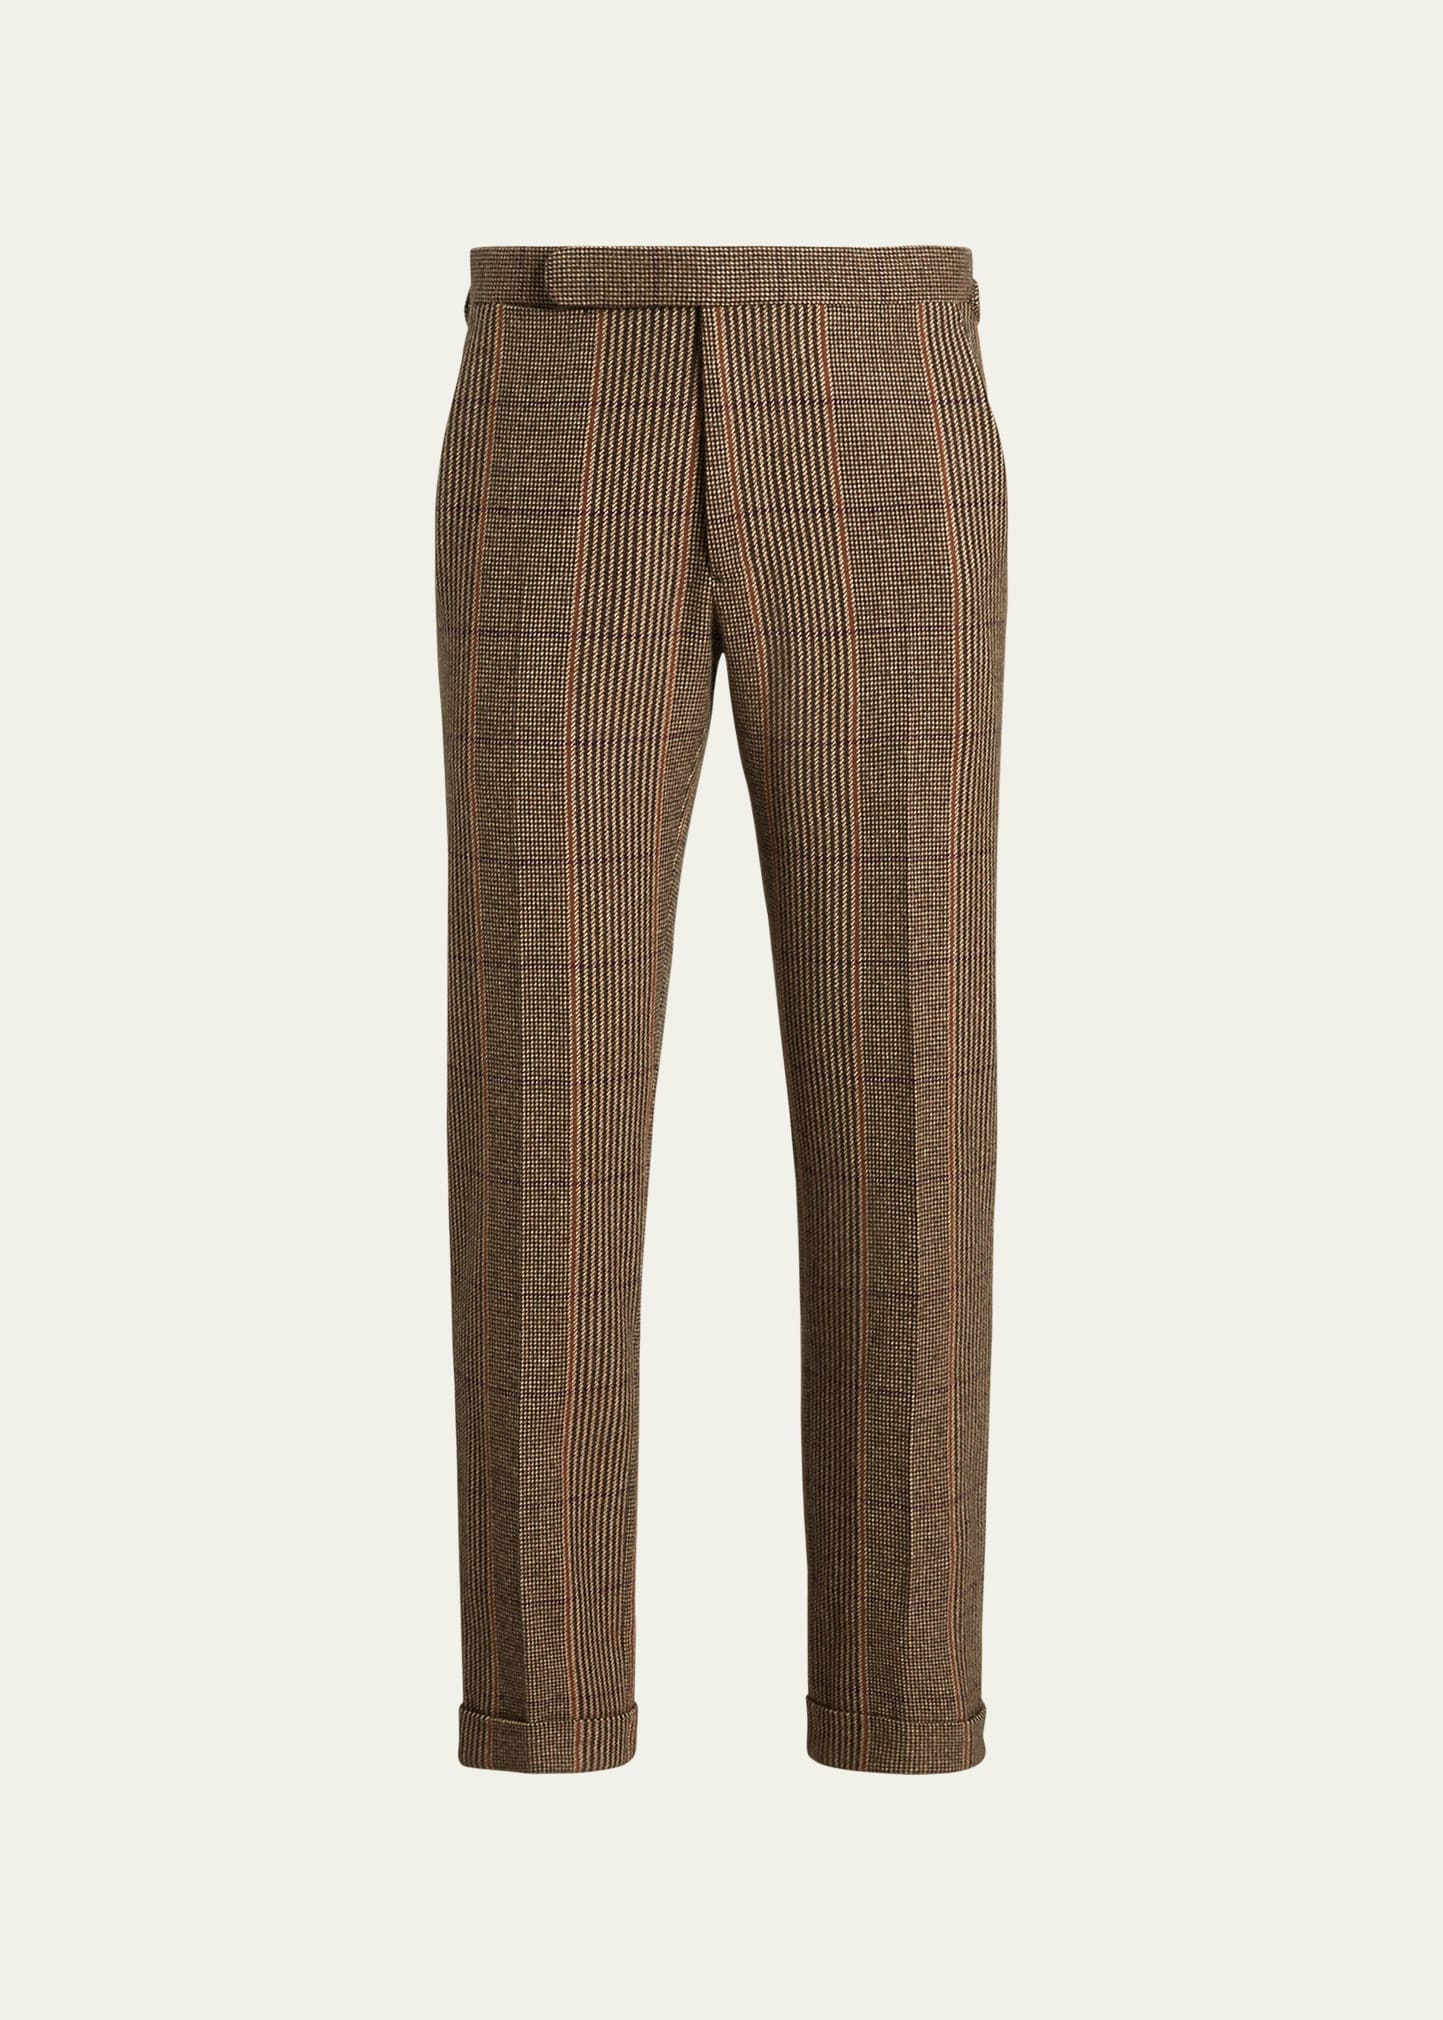 Ralph Lauren Purple Label Men's Gregory Patterned Cashmere Trousers In Bwmwogcrb